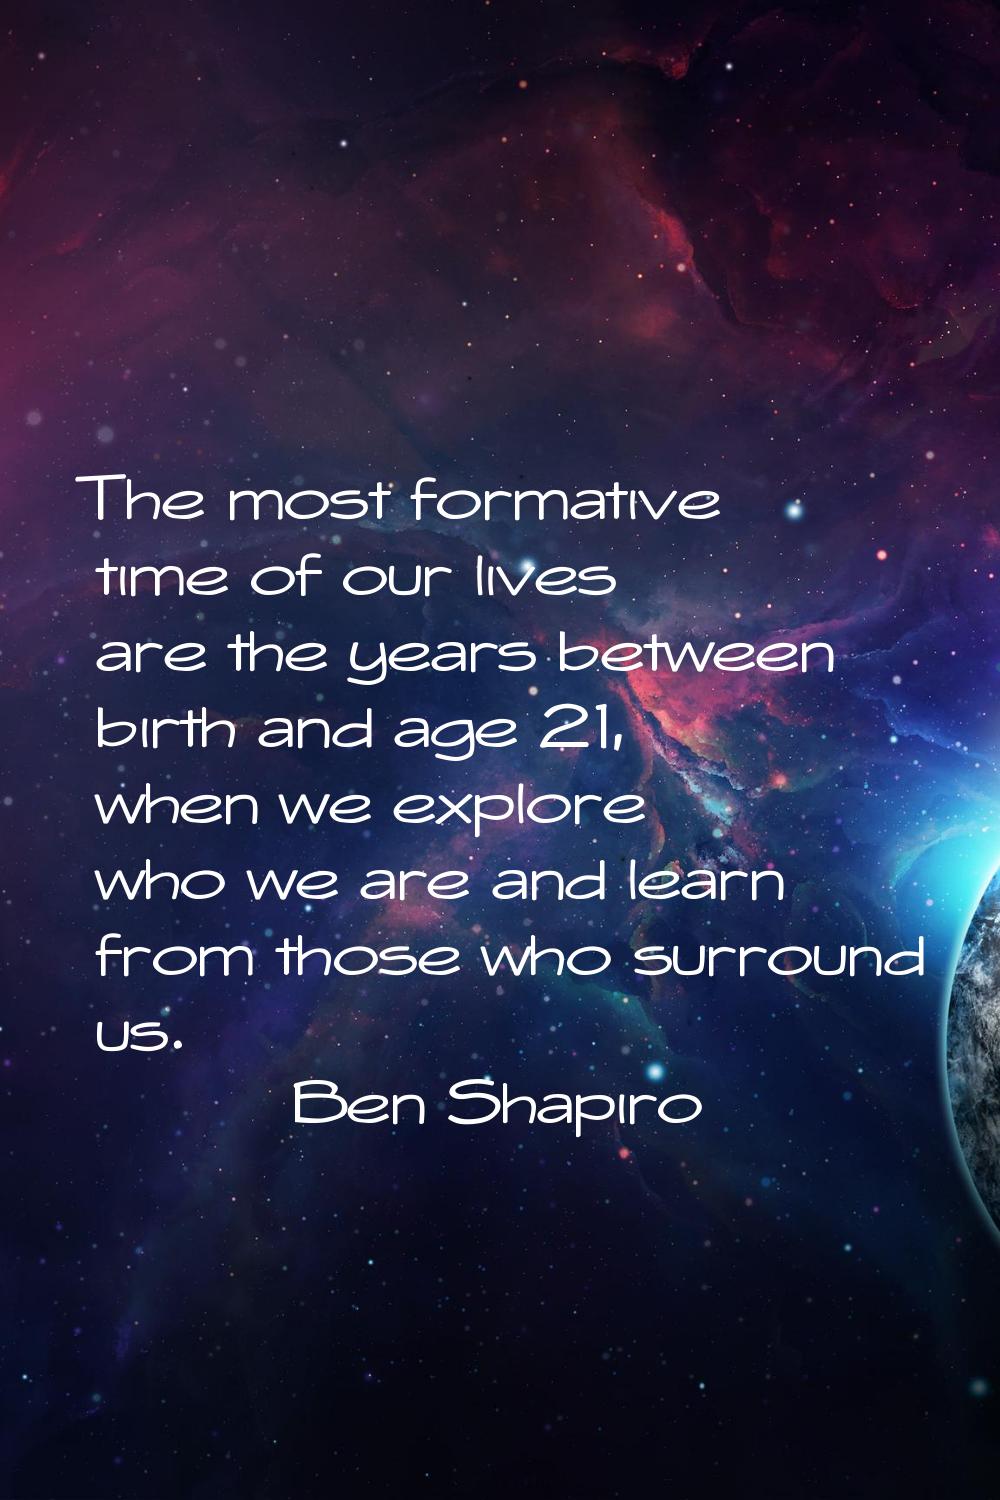 The most formative time of our lives are the years between birth and age 21, when we explore who we